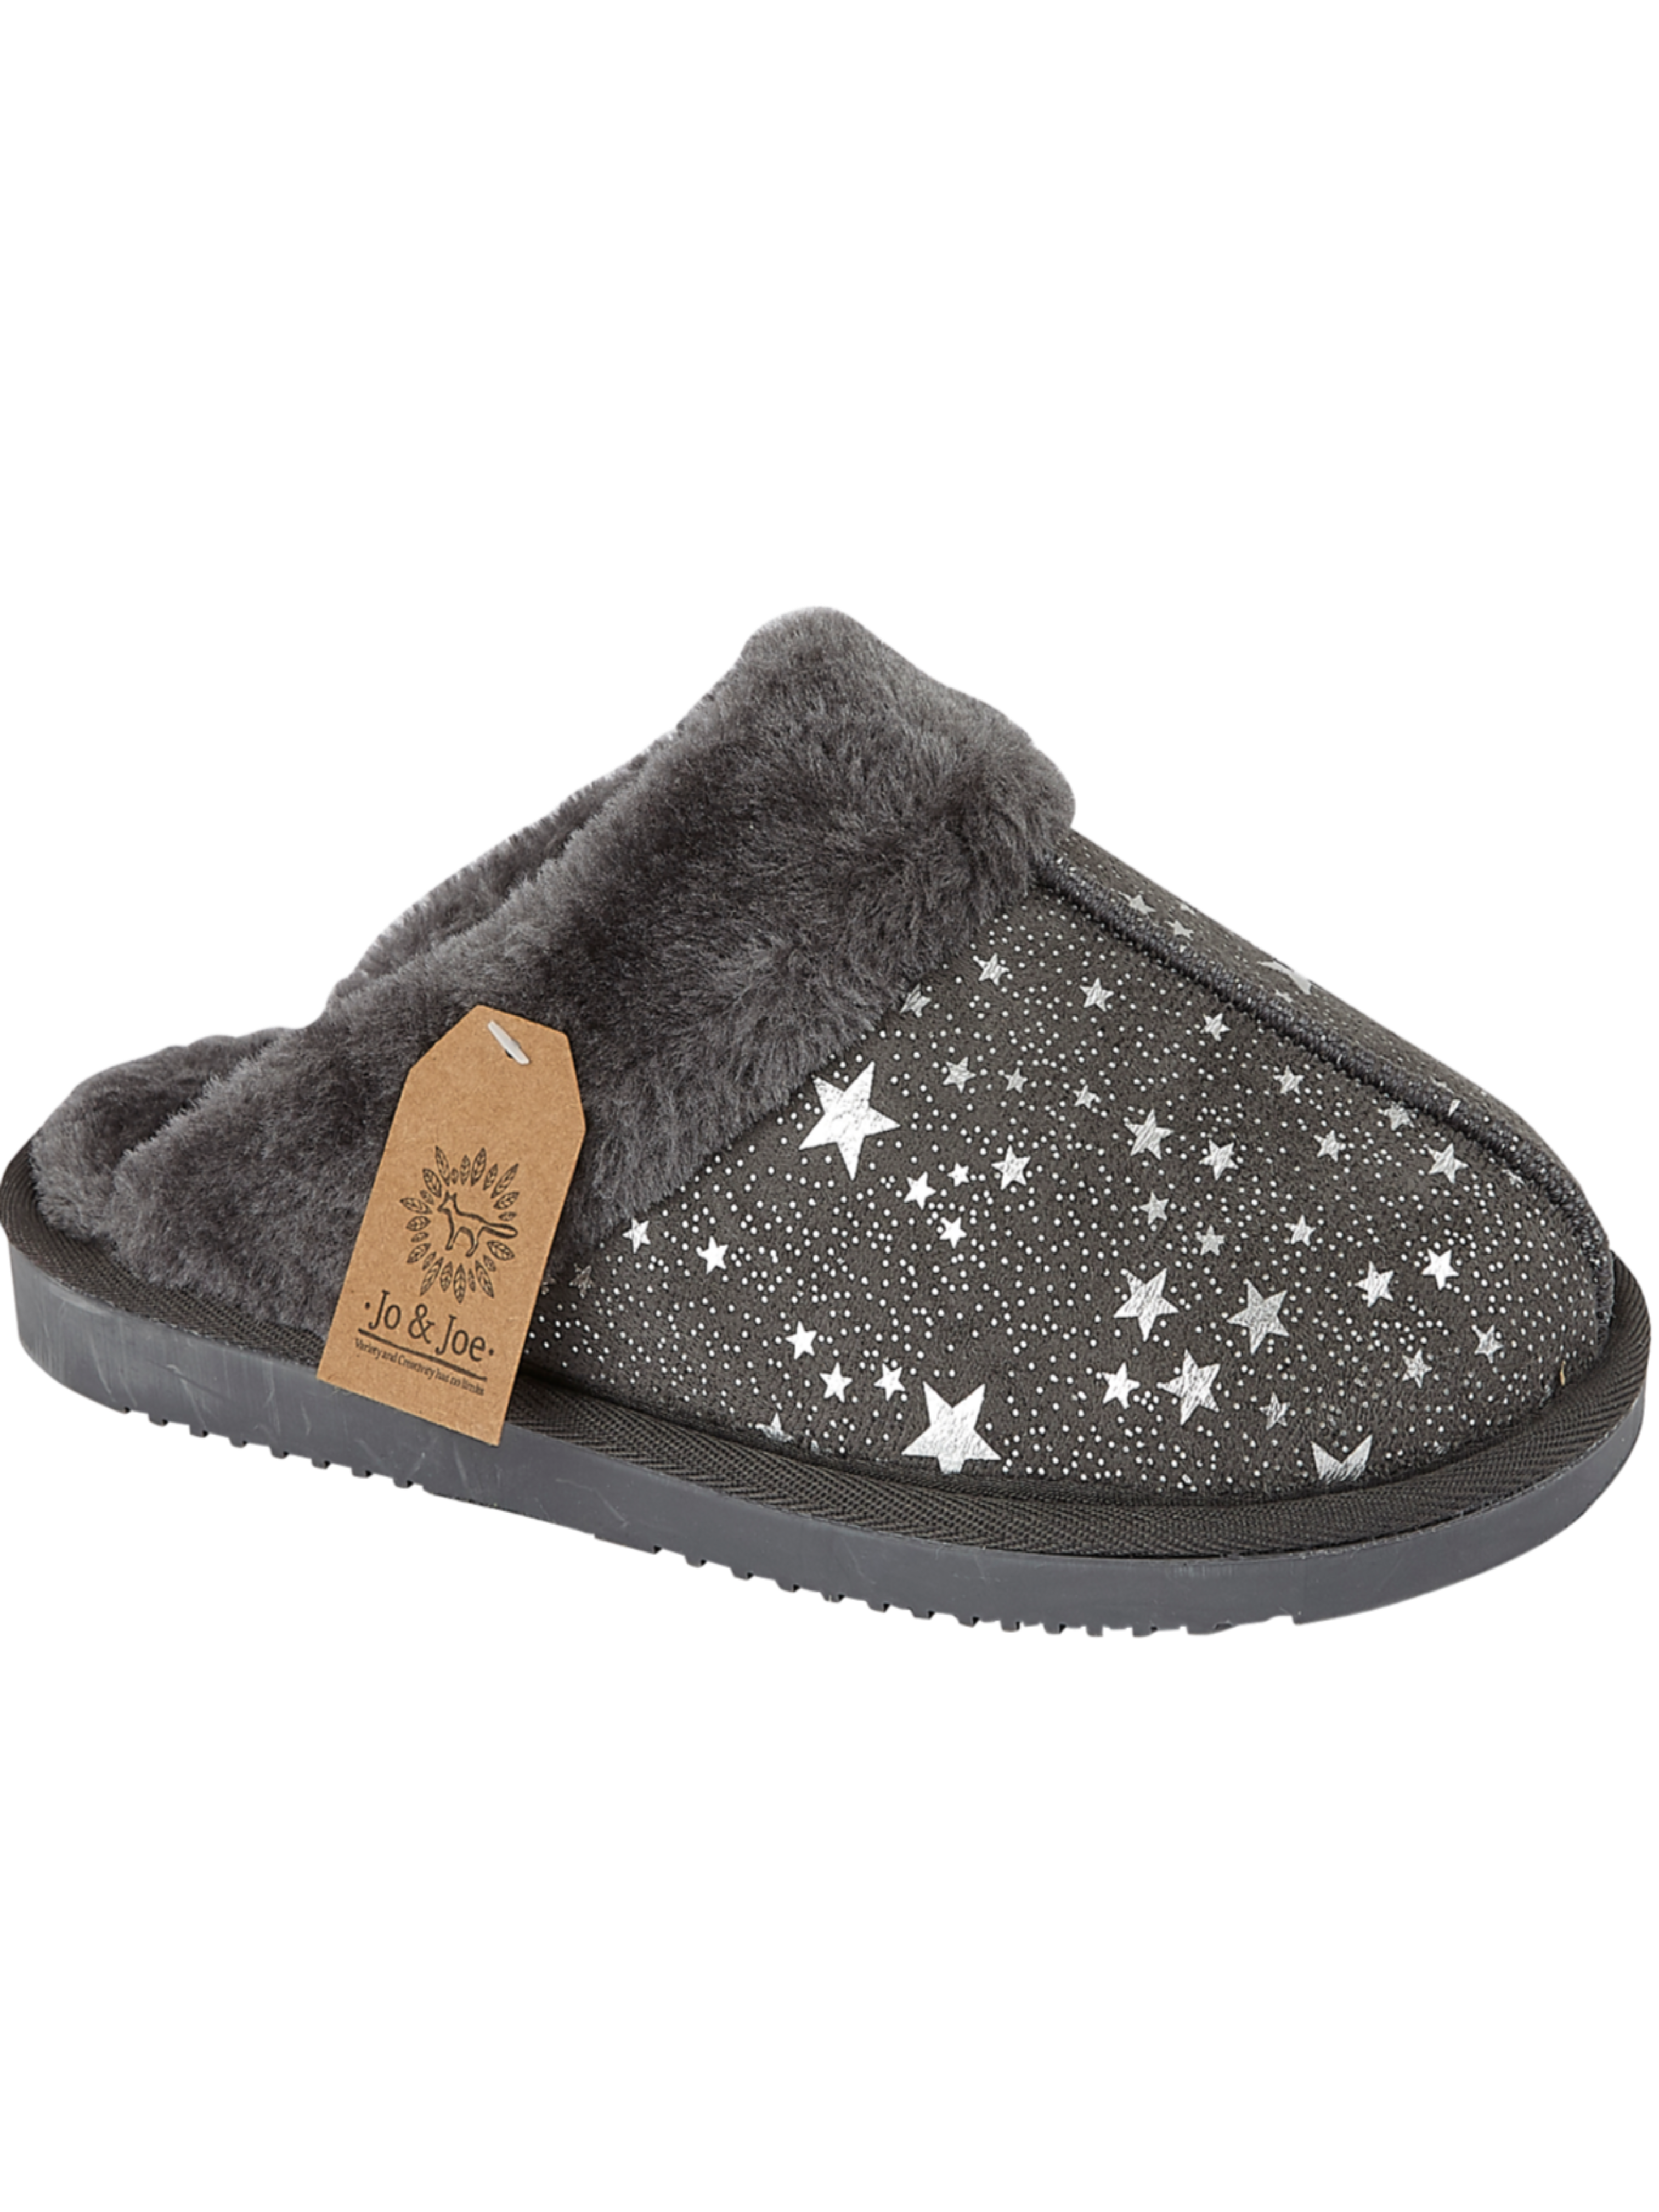 Charcoal Grey Slipper with Silver Stars